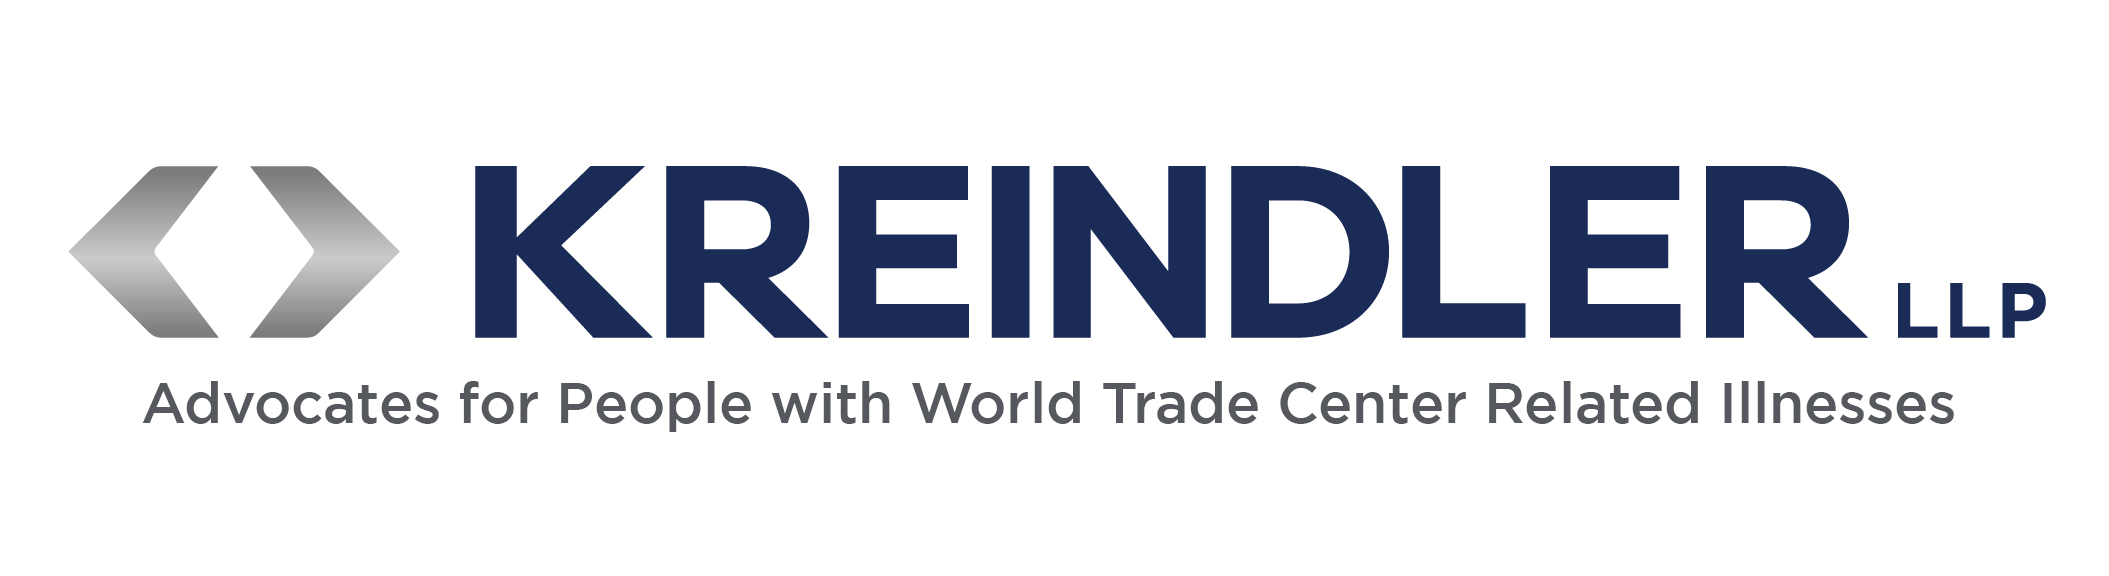 Kreindler LLP: Advocates for People with World Trade Center Related Illnesses